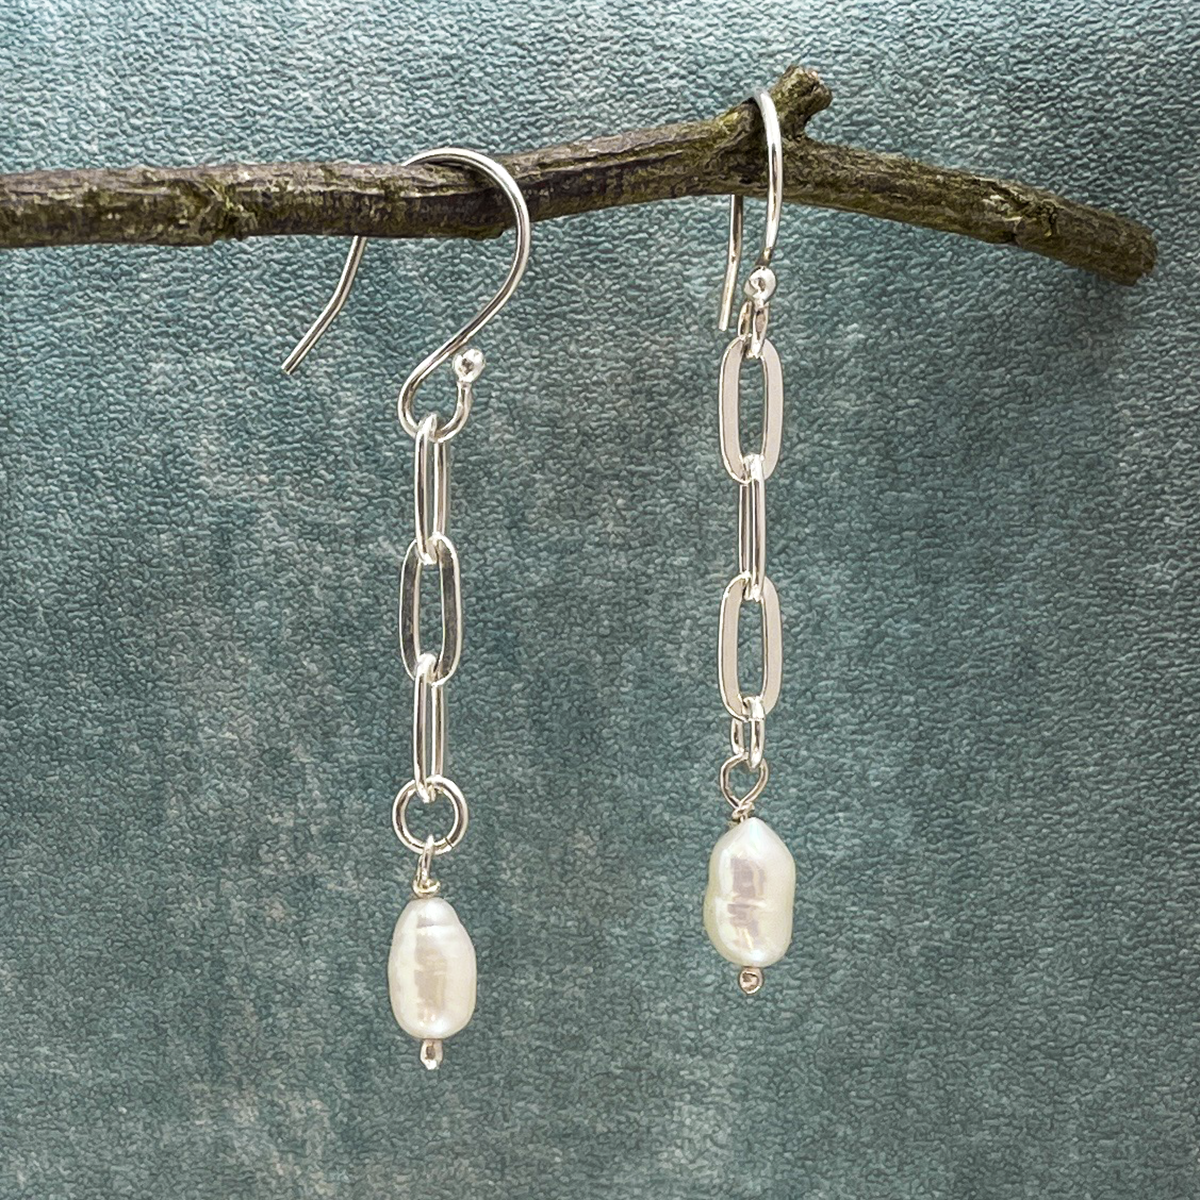 Pearla - Oval Link Chain with White Fresh Water Pearl Silver Earrings - Dangle